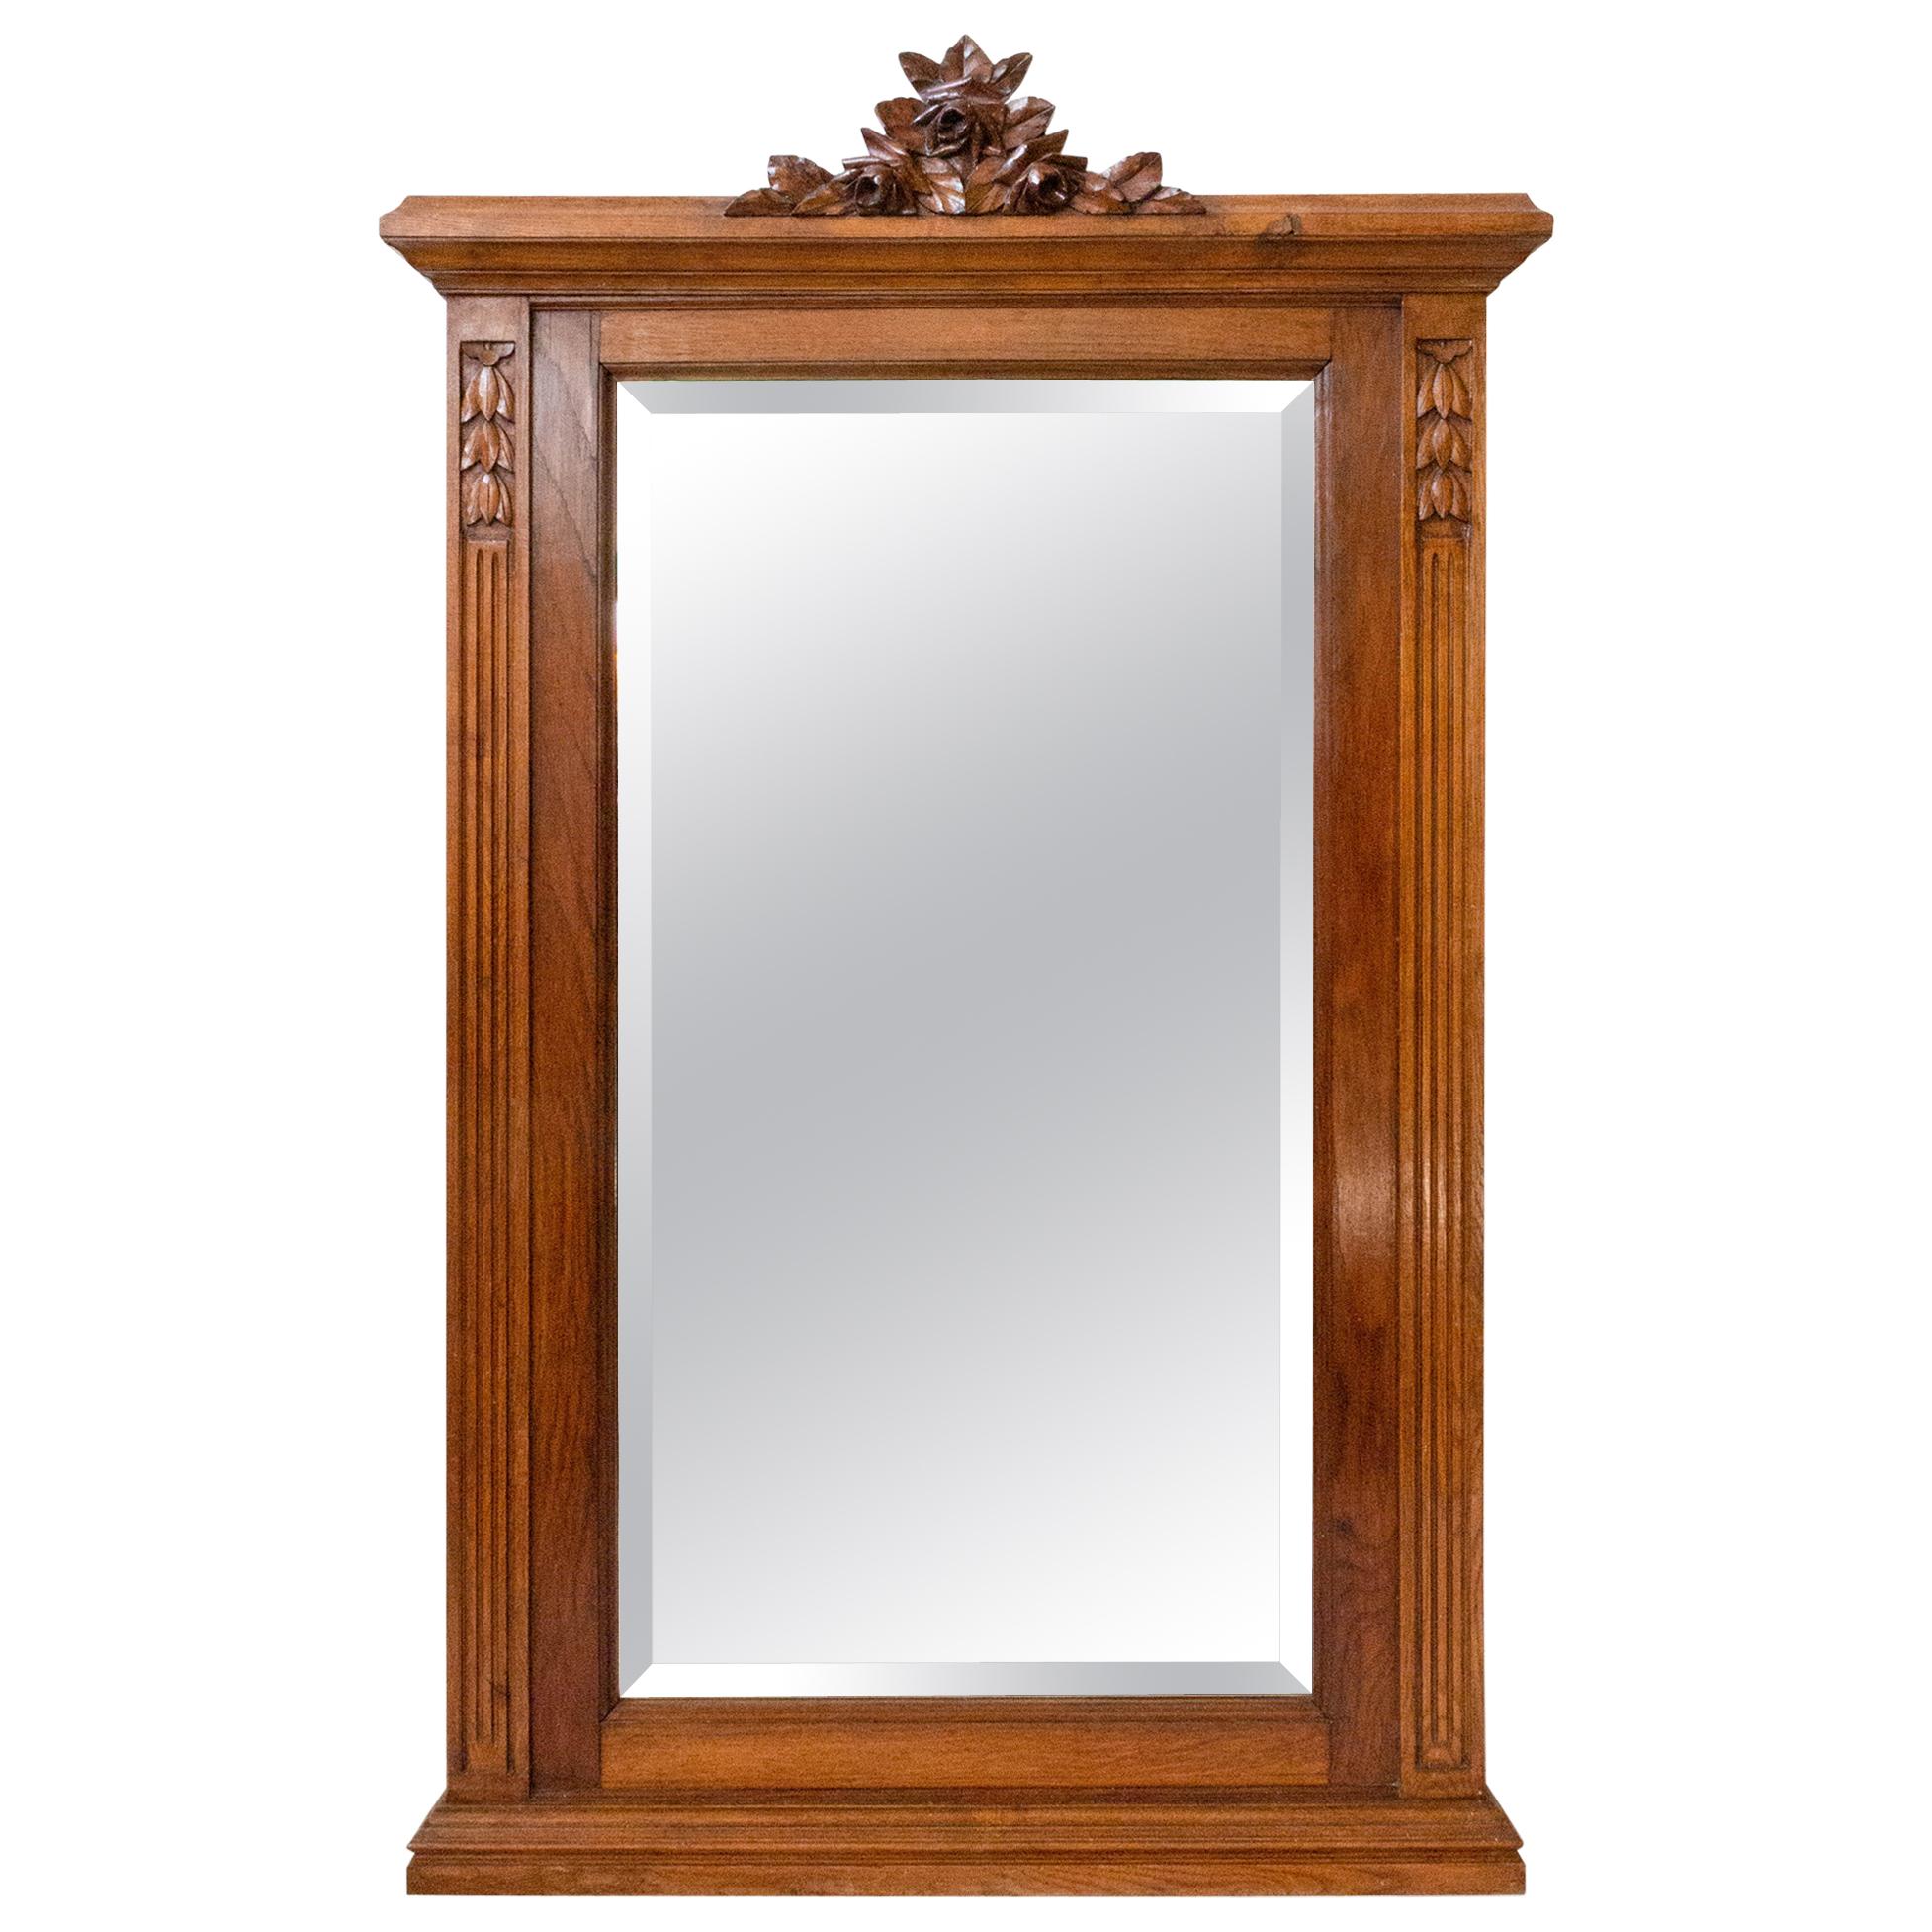 French Art Nouveau Louis XVI Style Beveled Mirror, Early 20th C. For Sale